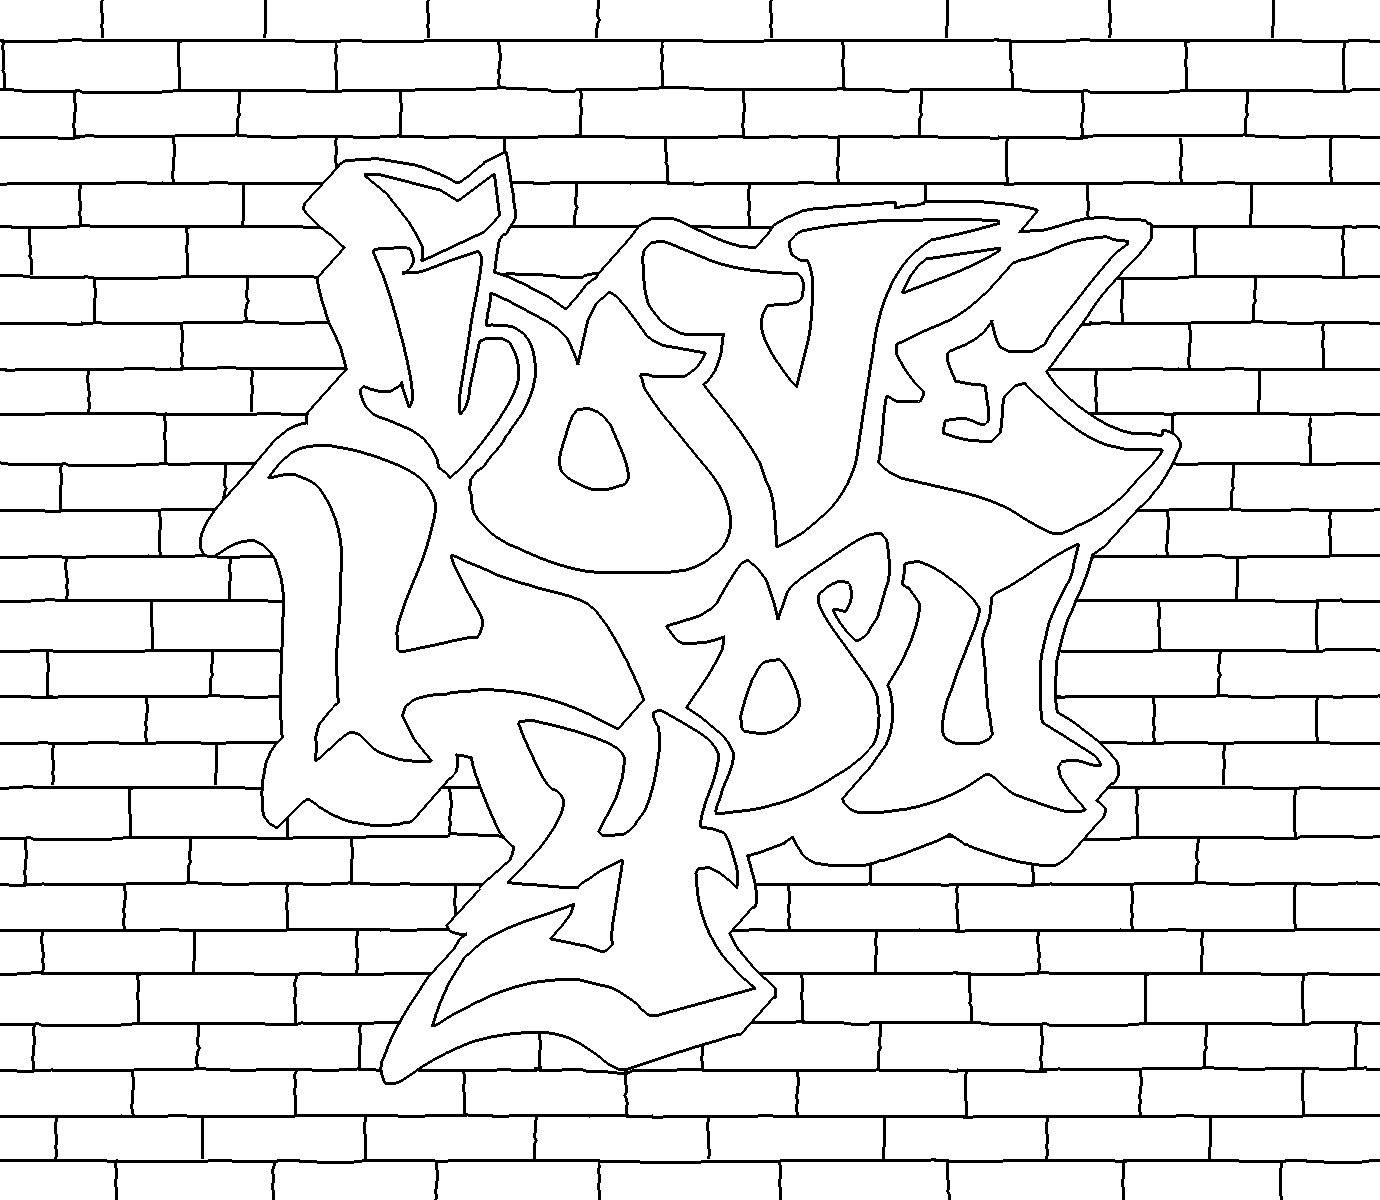 graffiti words coloring pages for teenagers